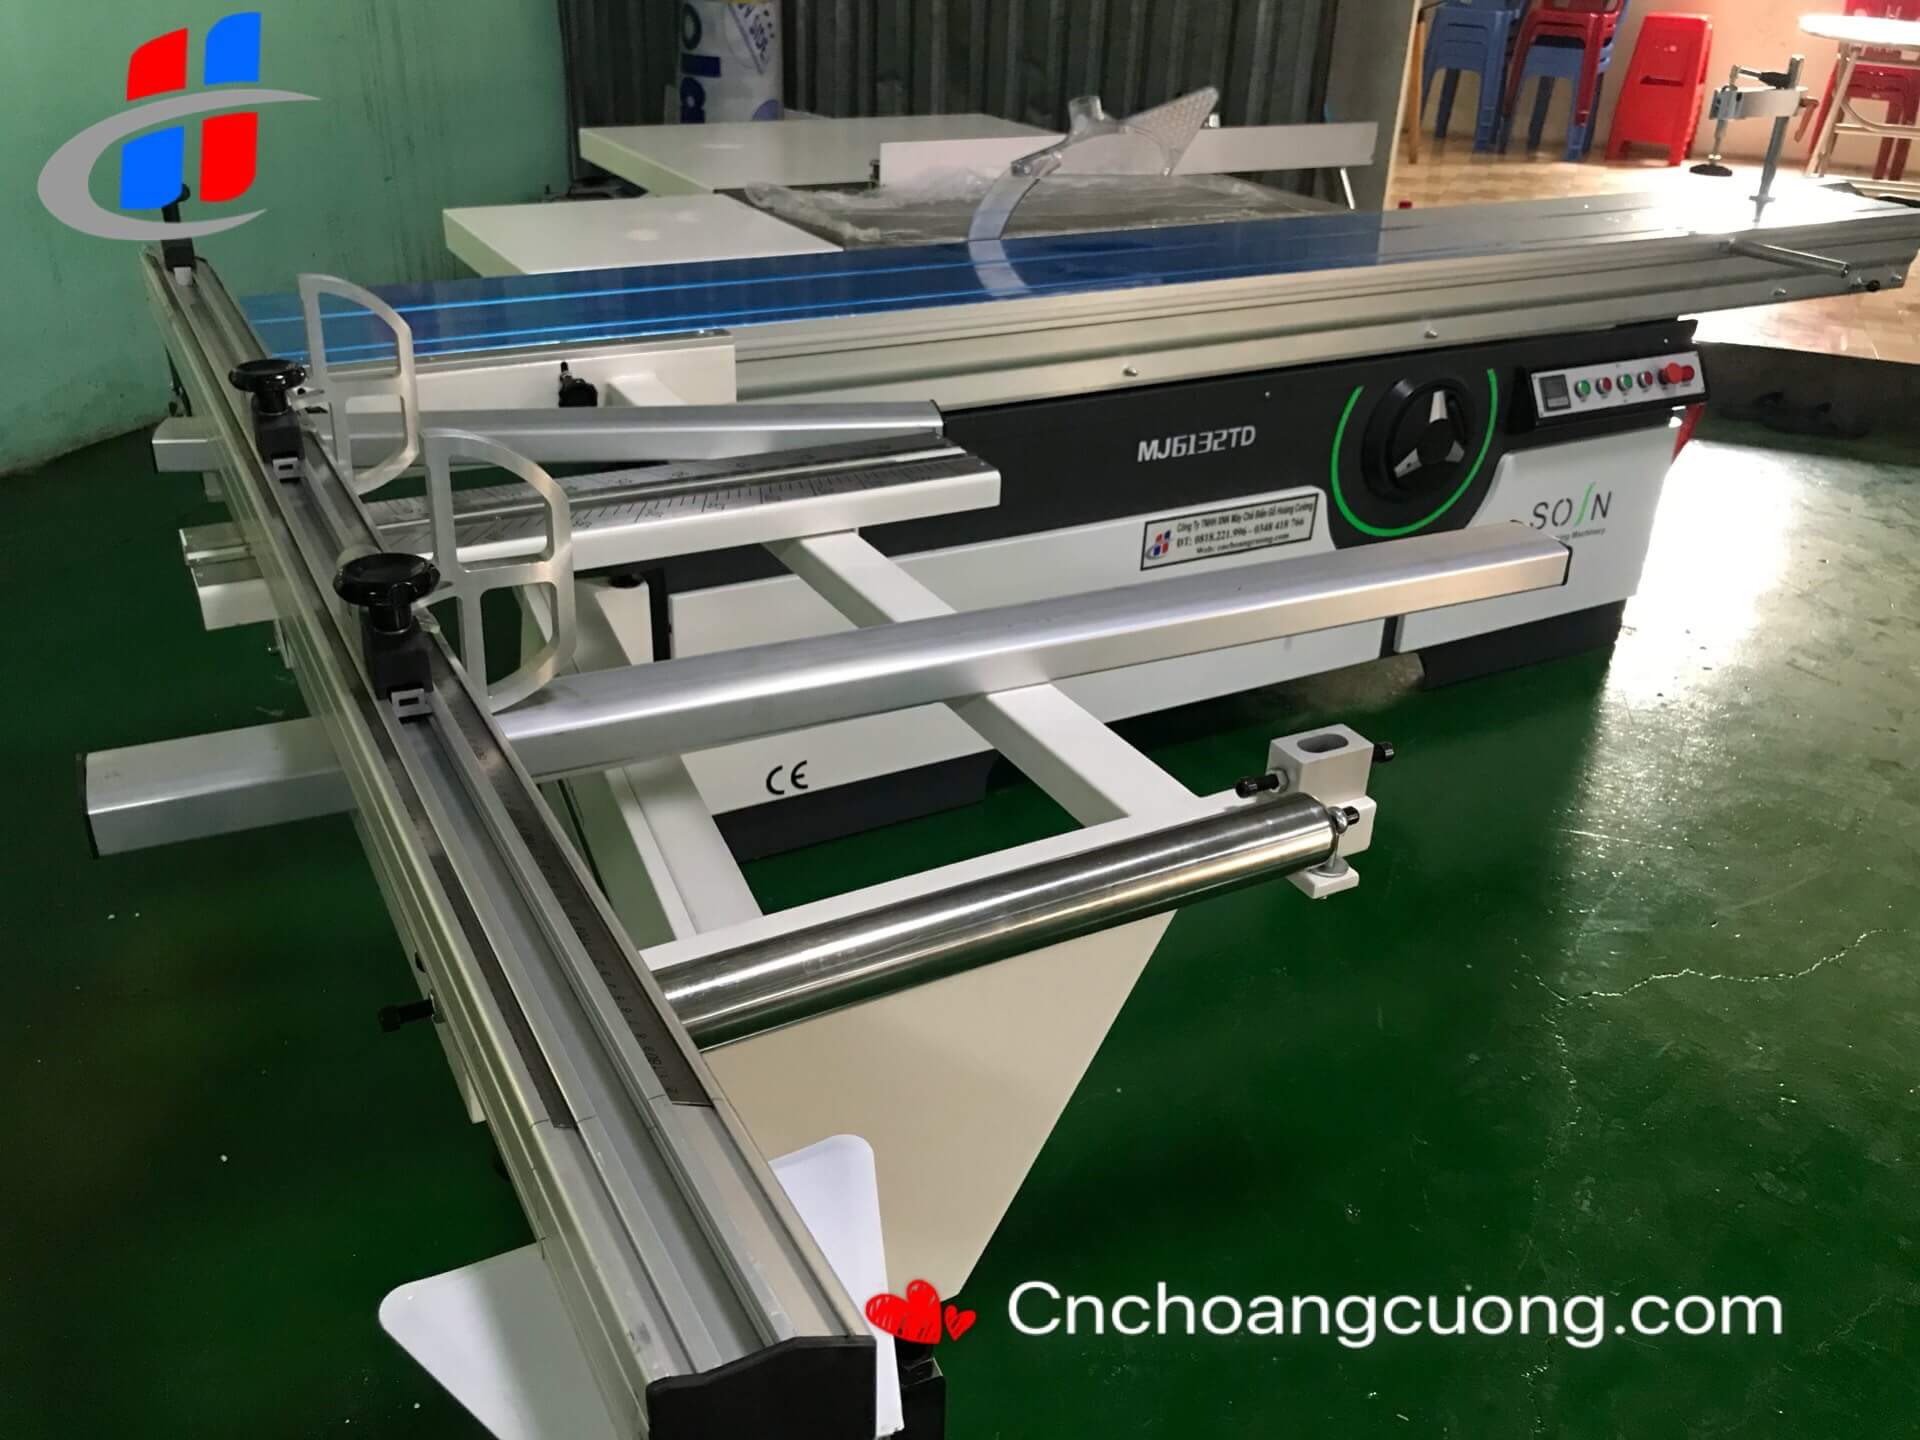 https://cnchoangcuong.com/?post_type=product&p=2264&preview=true